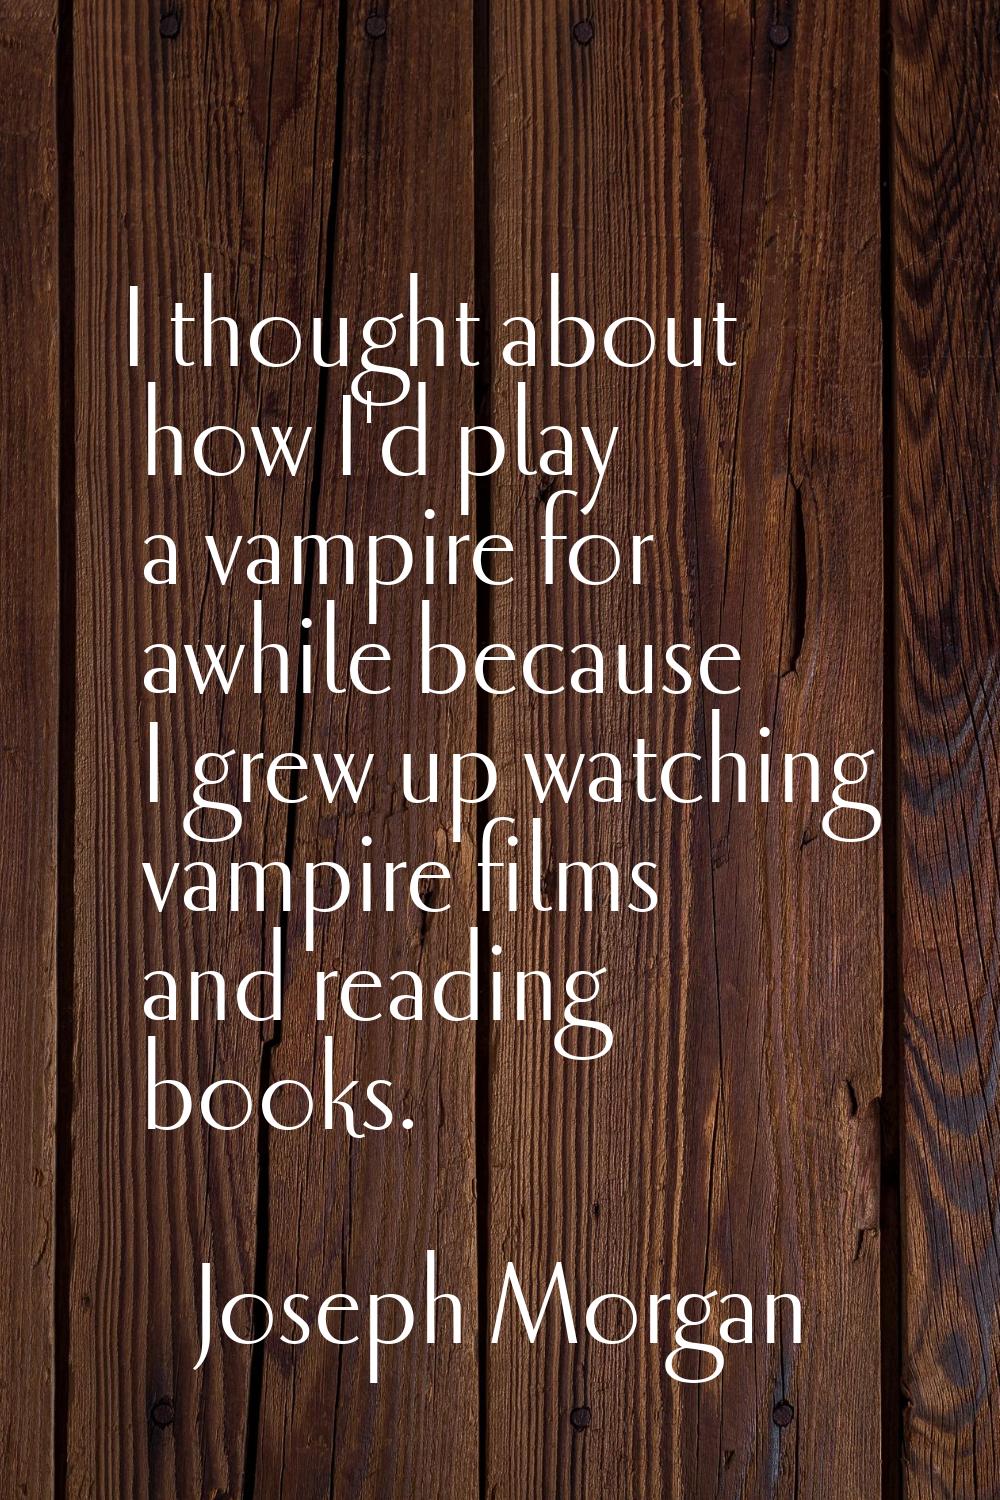 I thought about how I'd play a vampire for awhile because I grew up watching vampire films and read